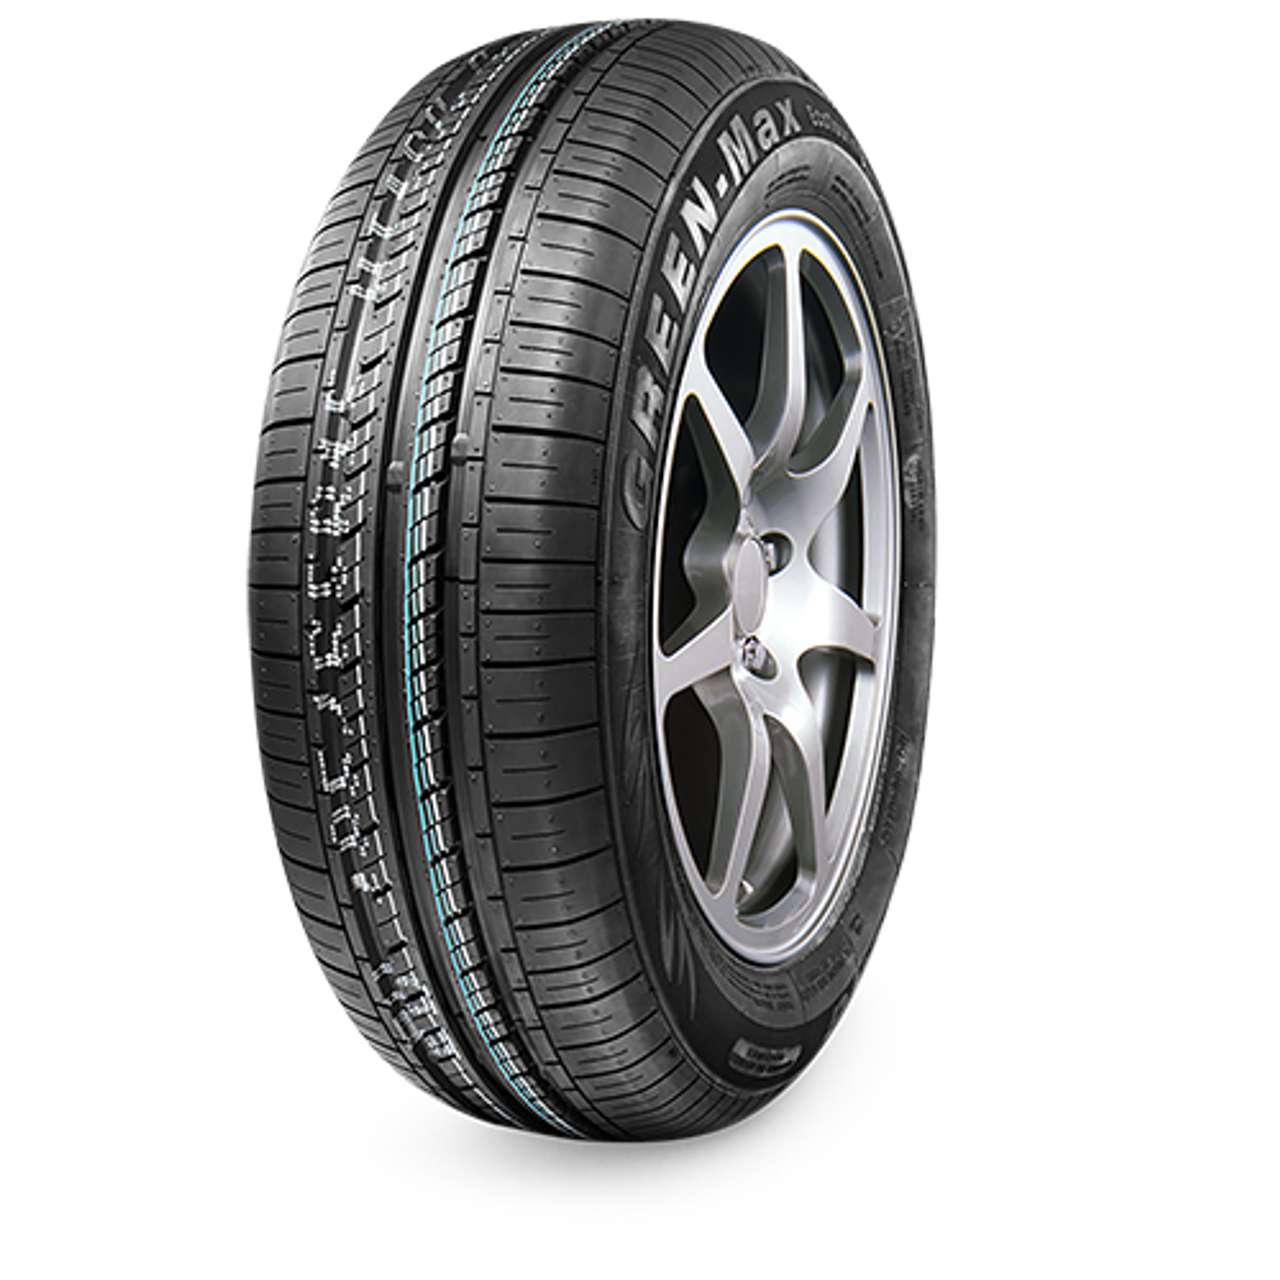 LINGLONG GREEN-MAX ECOTOURING 165/70R13 79T BSW von LINGLONG